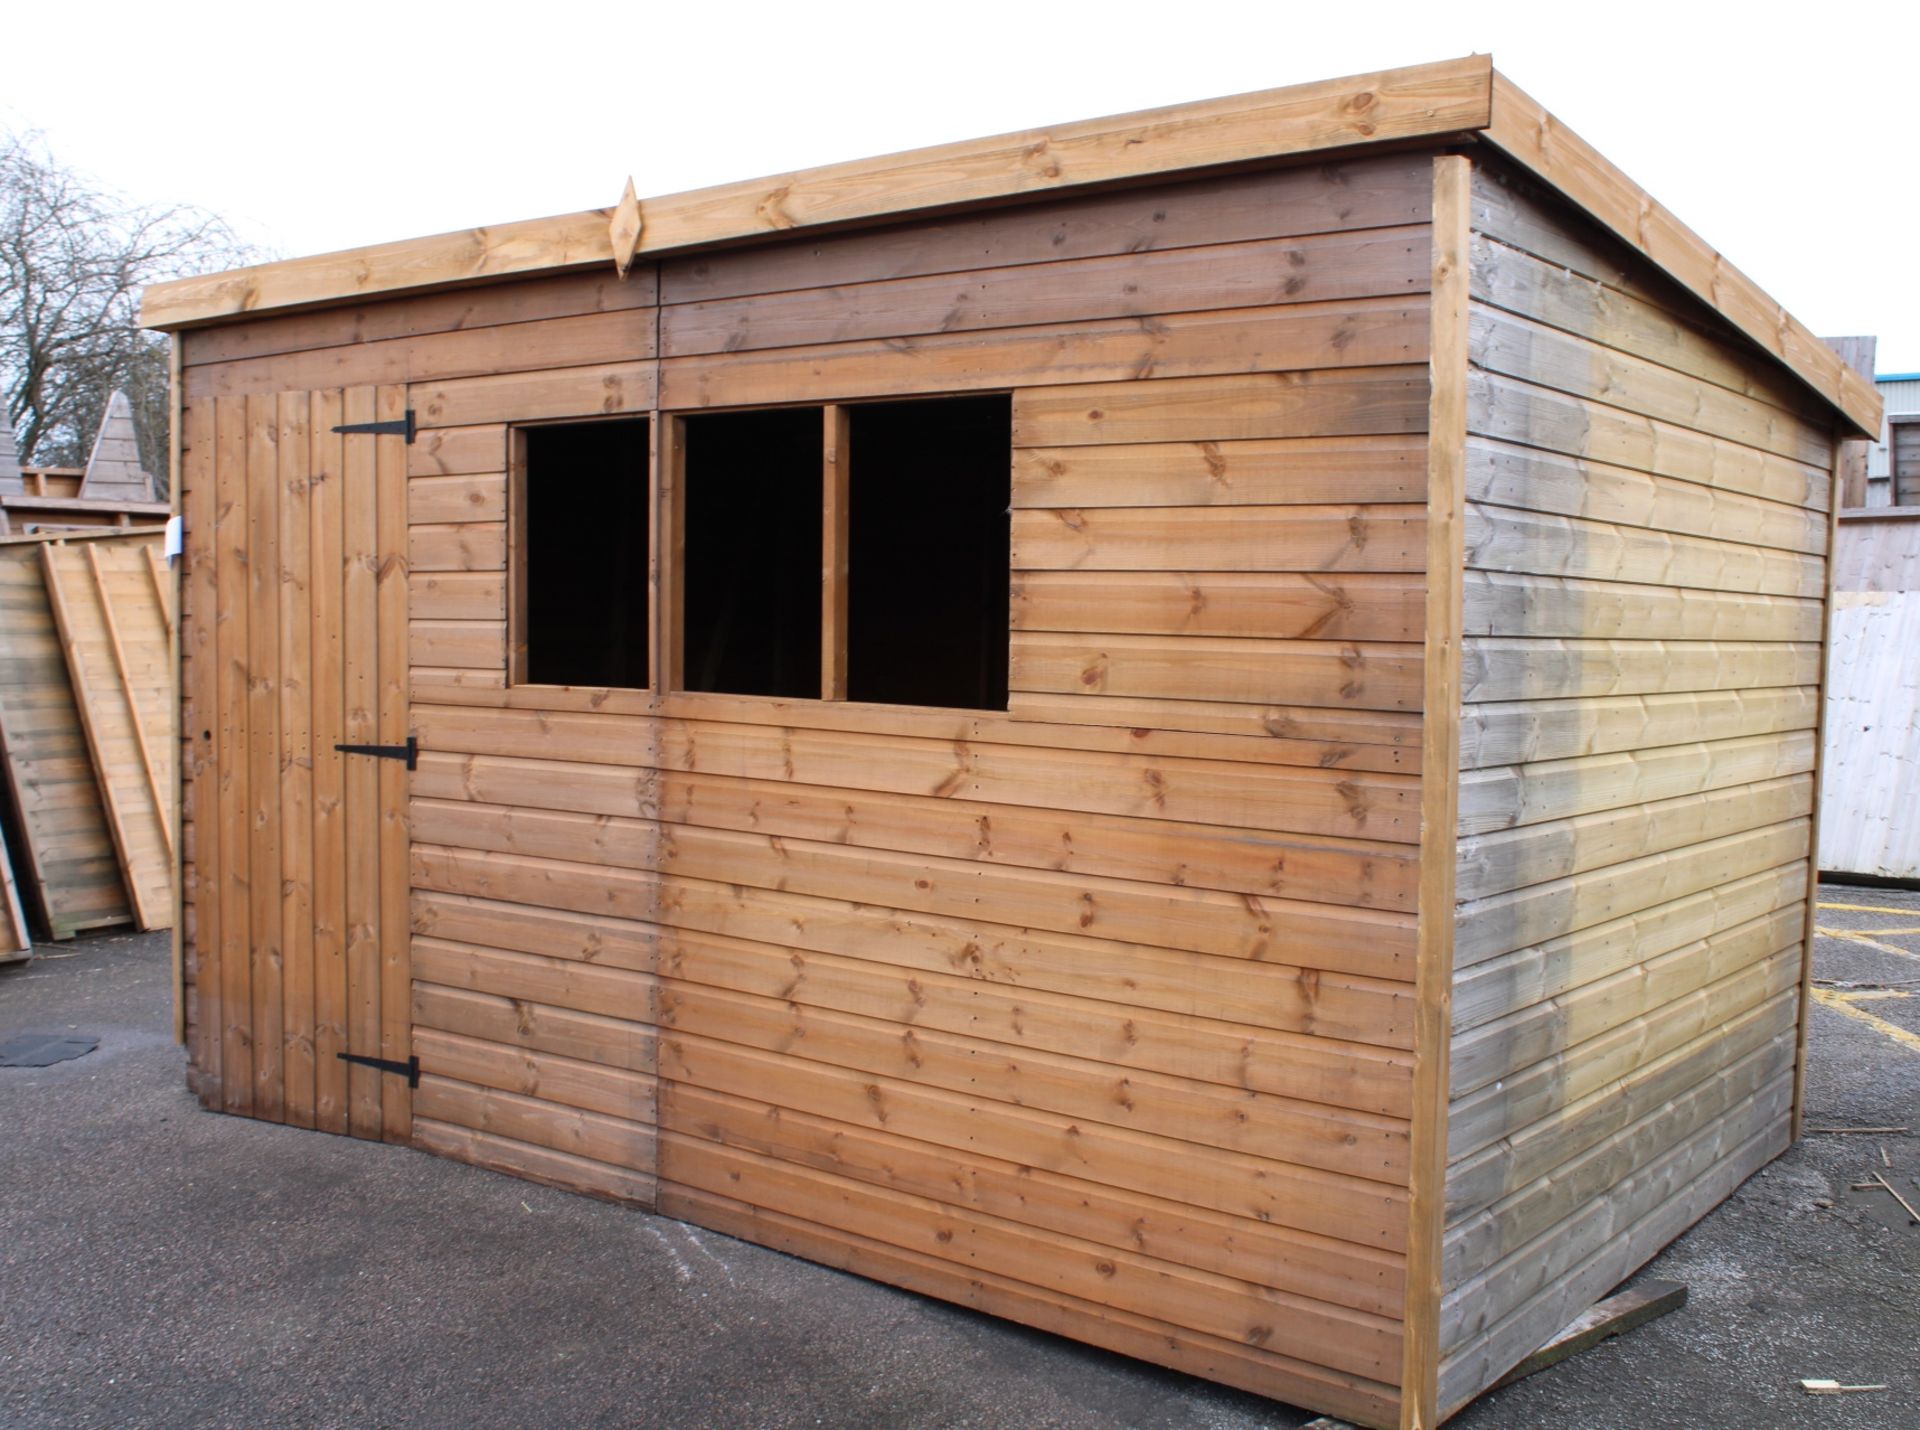 12x8 superior height pent shed, Standard 16mm Nominal Cladding - Image 4 of 5